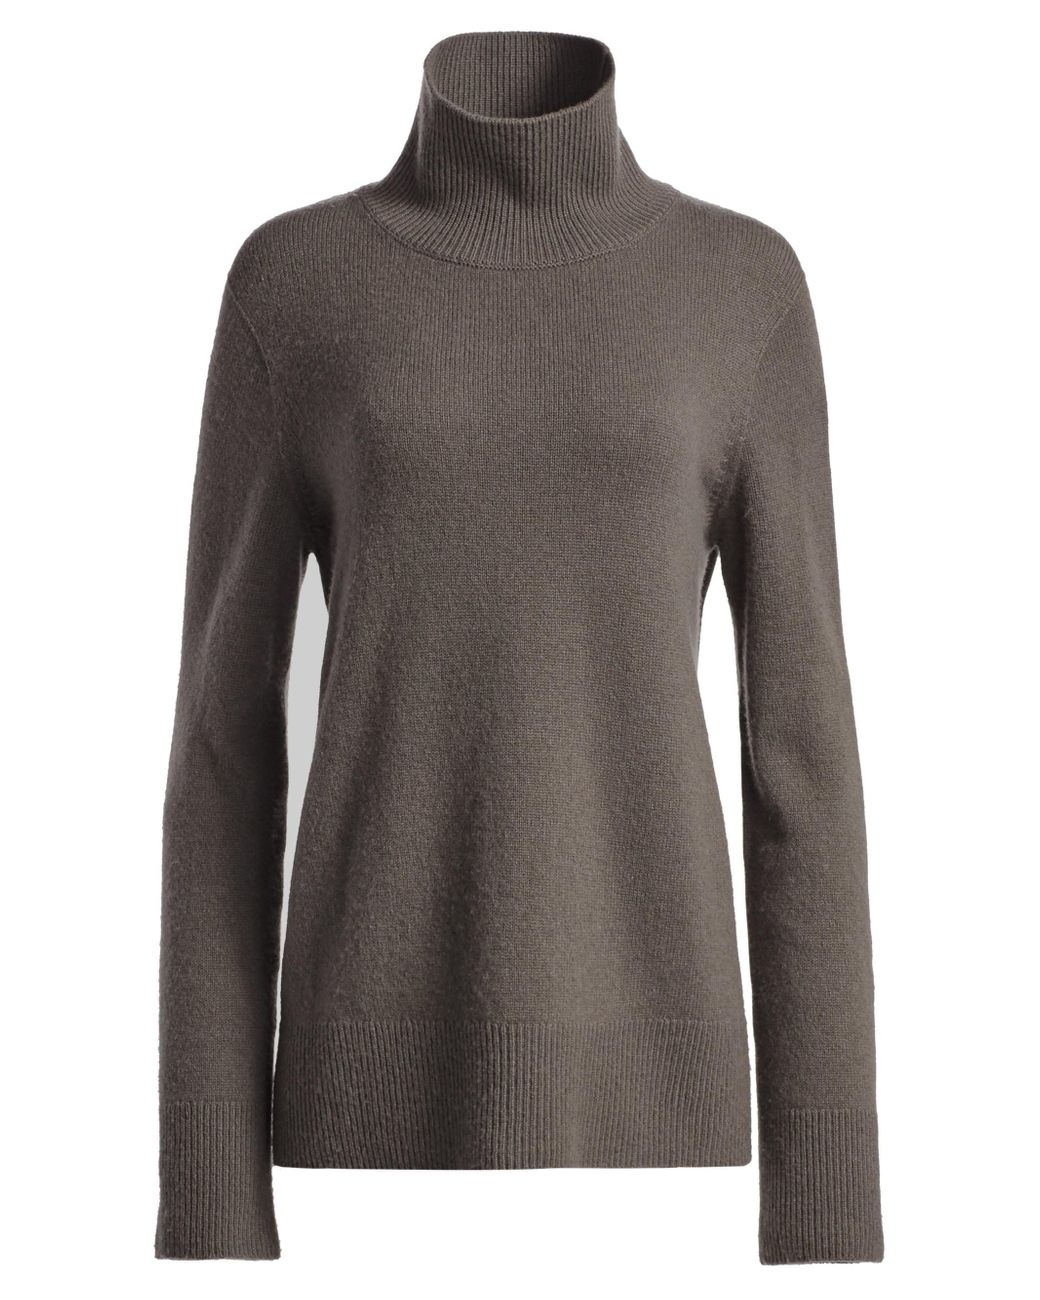 The Row Milina Wool & Cashmere Knit Turtleneck Sweater in Gray - Lyst